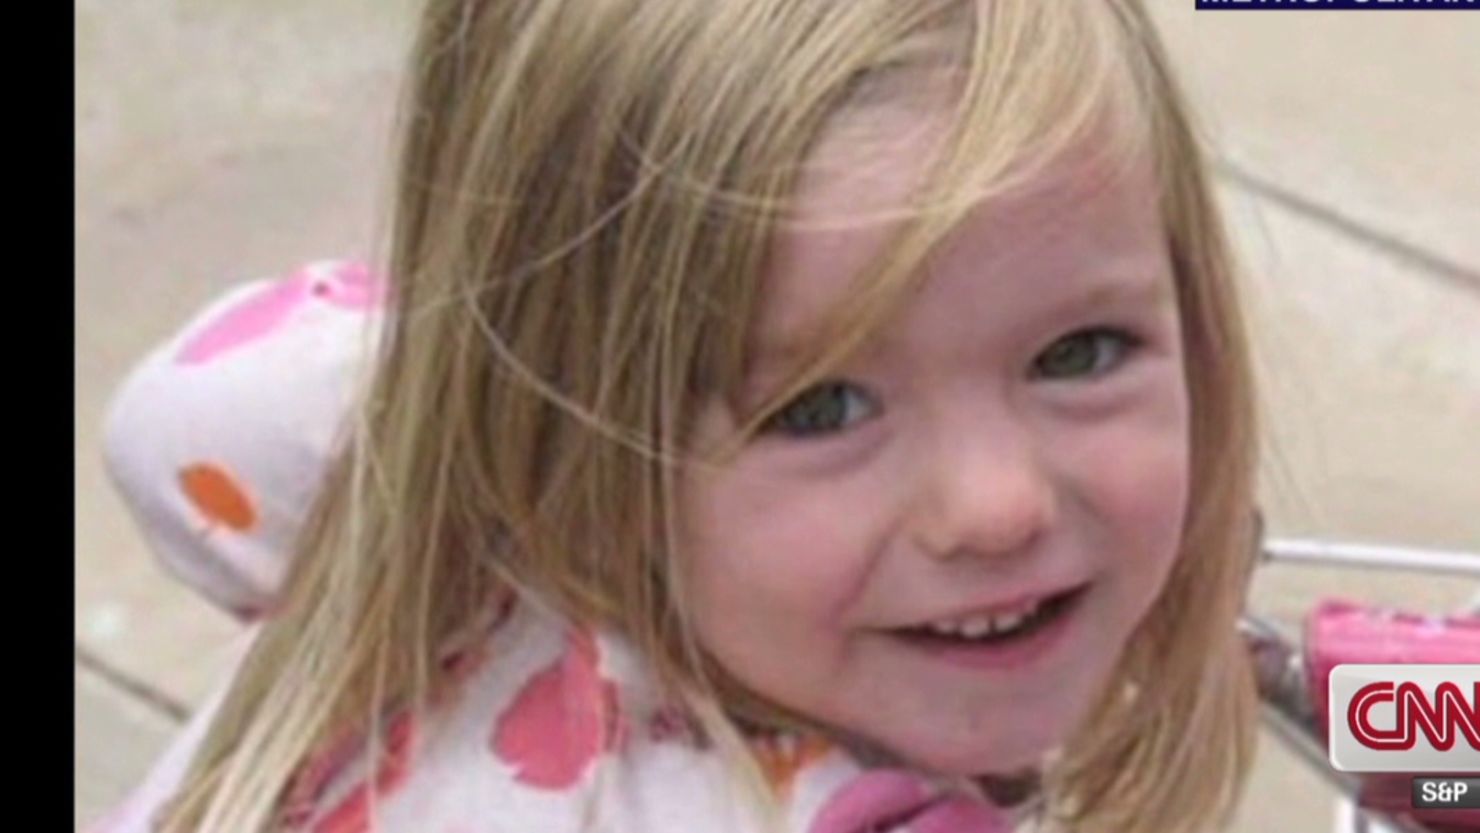 File photo: Madeleine McCann, pictured, disappeared in 2007.